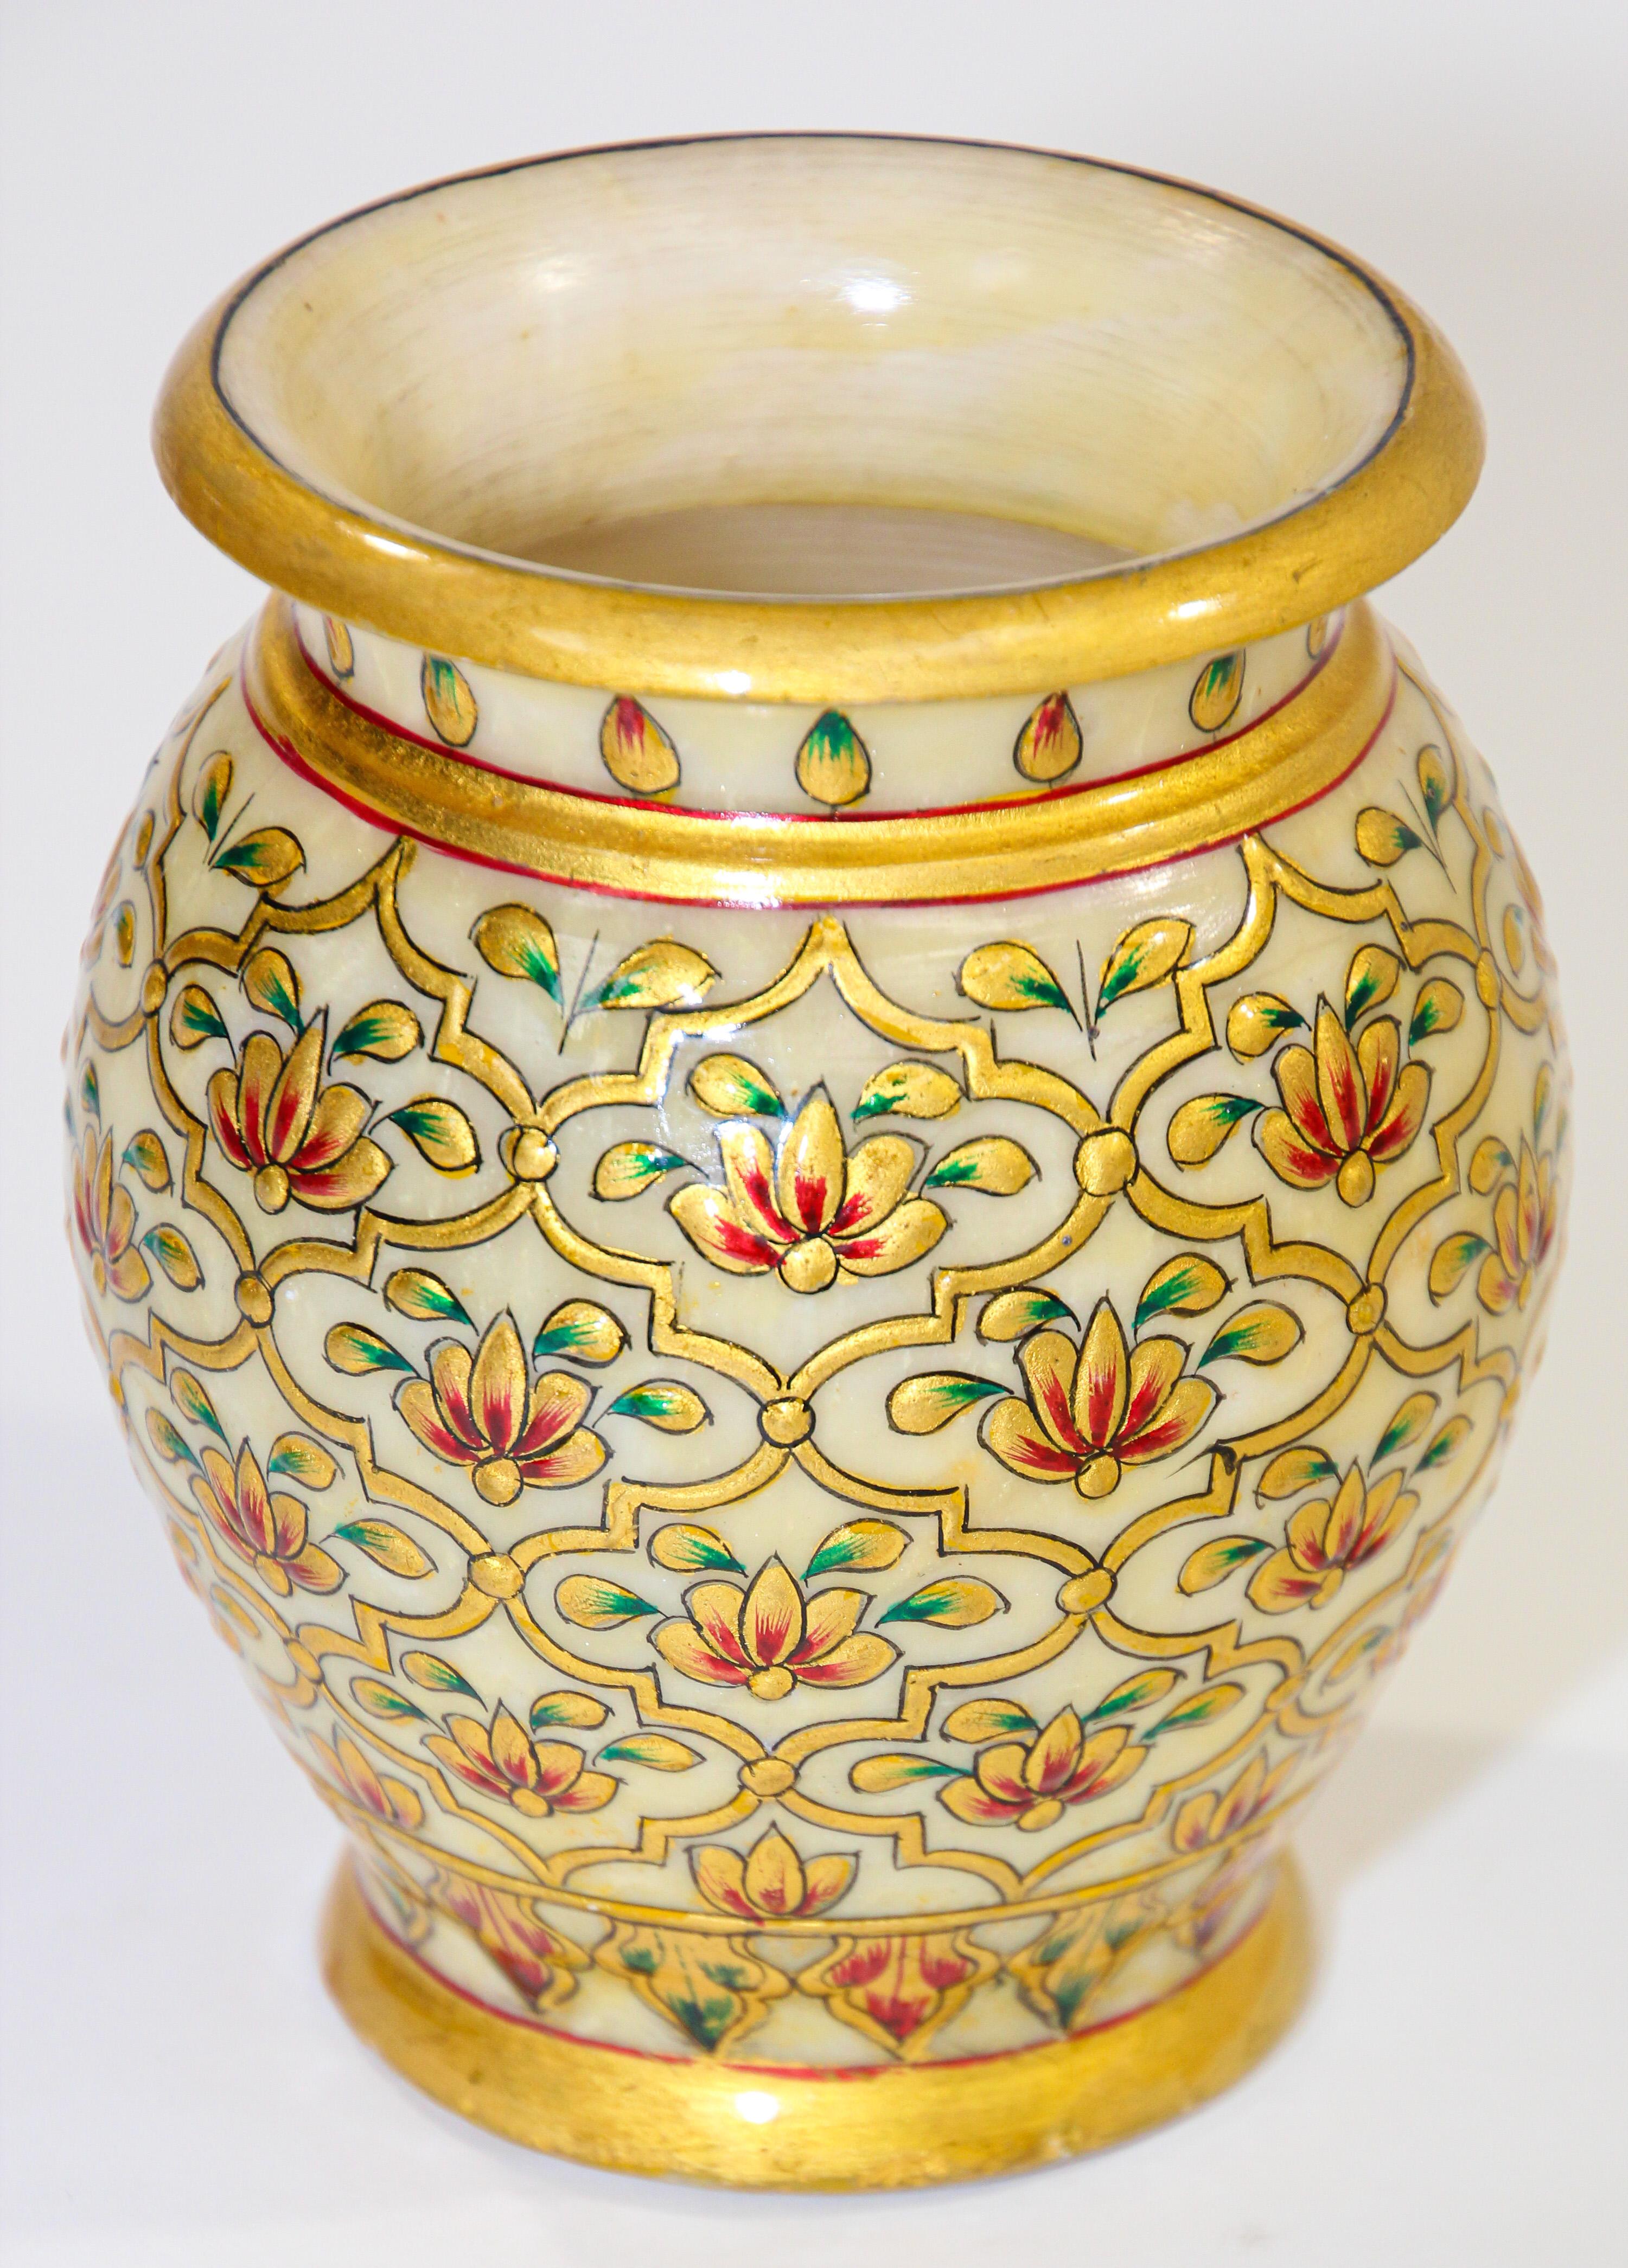 Indian Mughal style Makrana marble vase hand carved and hand painted with gilt and polychrome floral design.
Beautiful Makrana marble vase overlaid and hand painted throughout in Moorish geometric design and Indian Mughal Raj arabesque.
This stylish